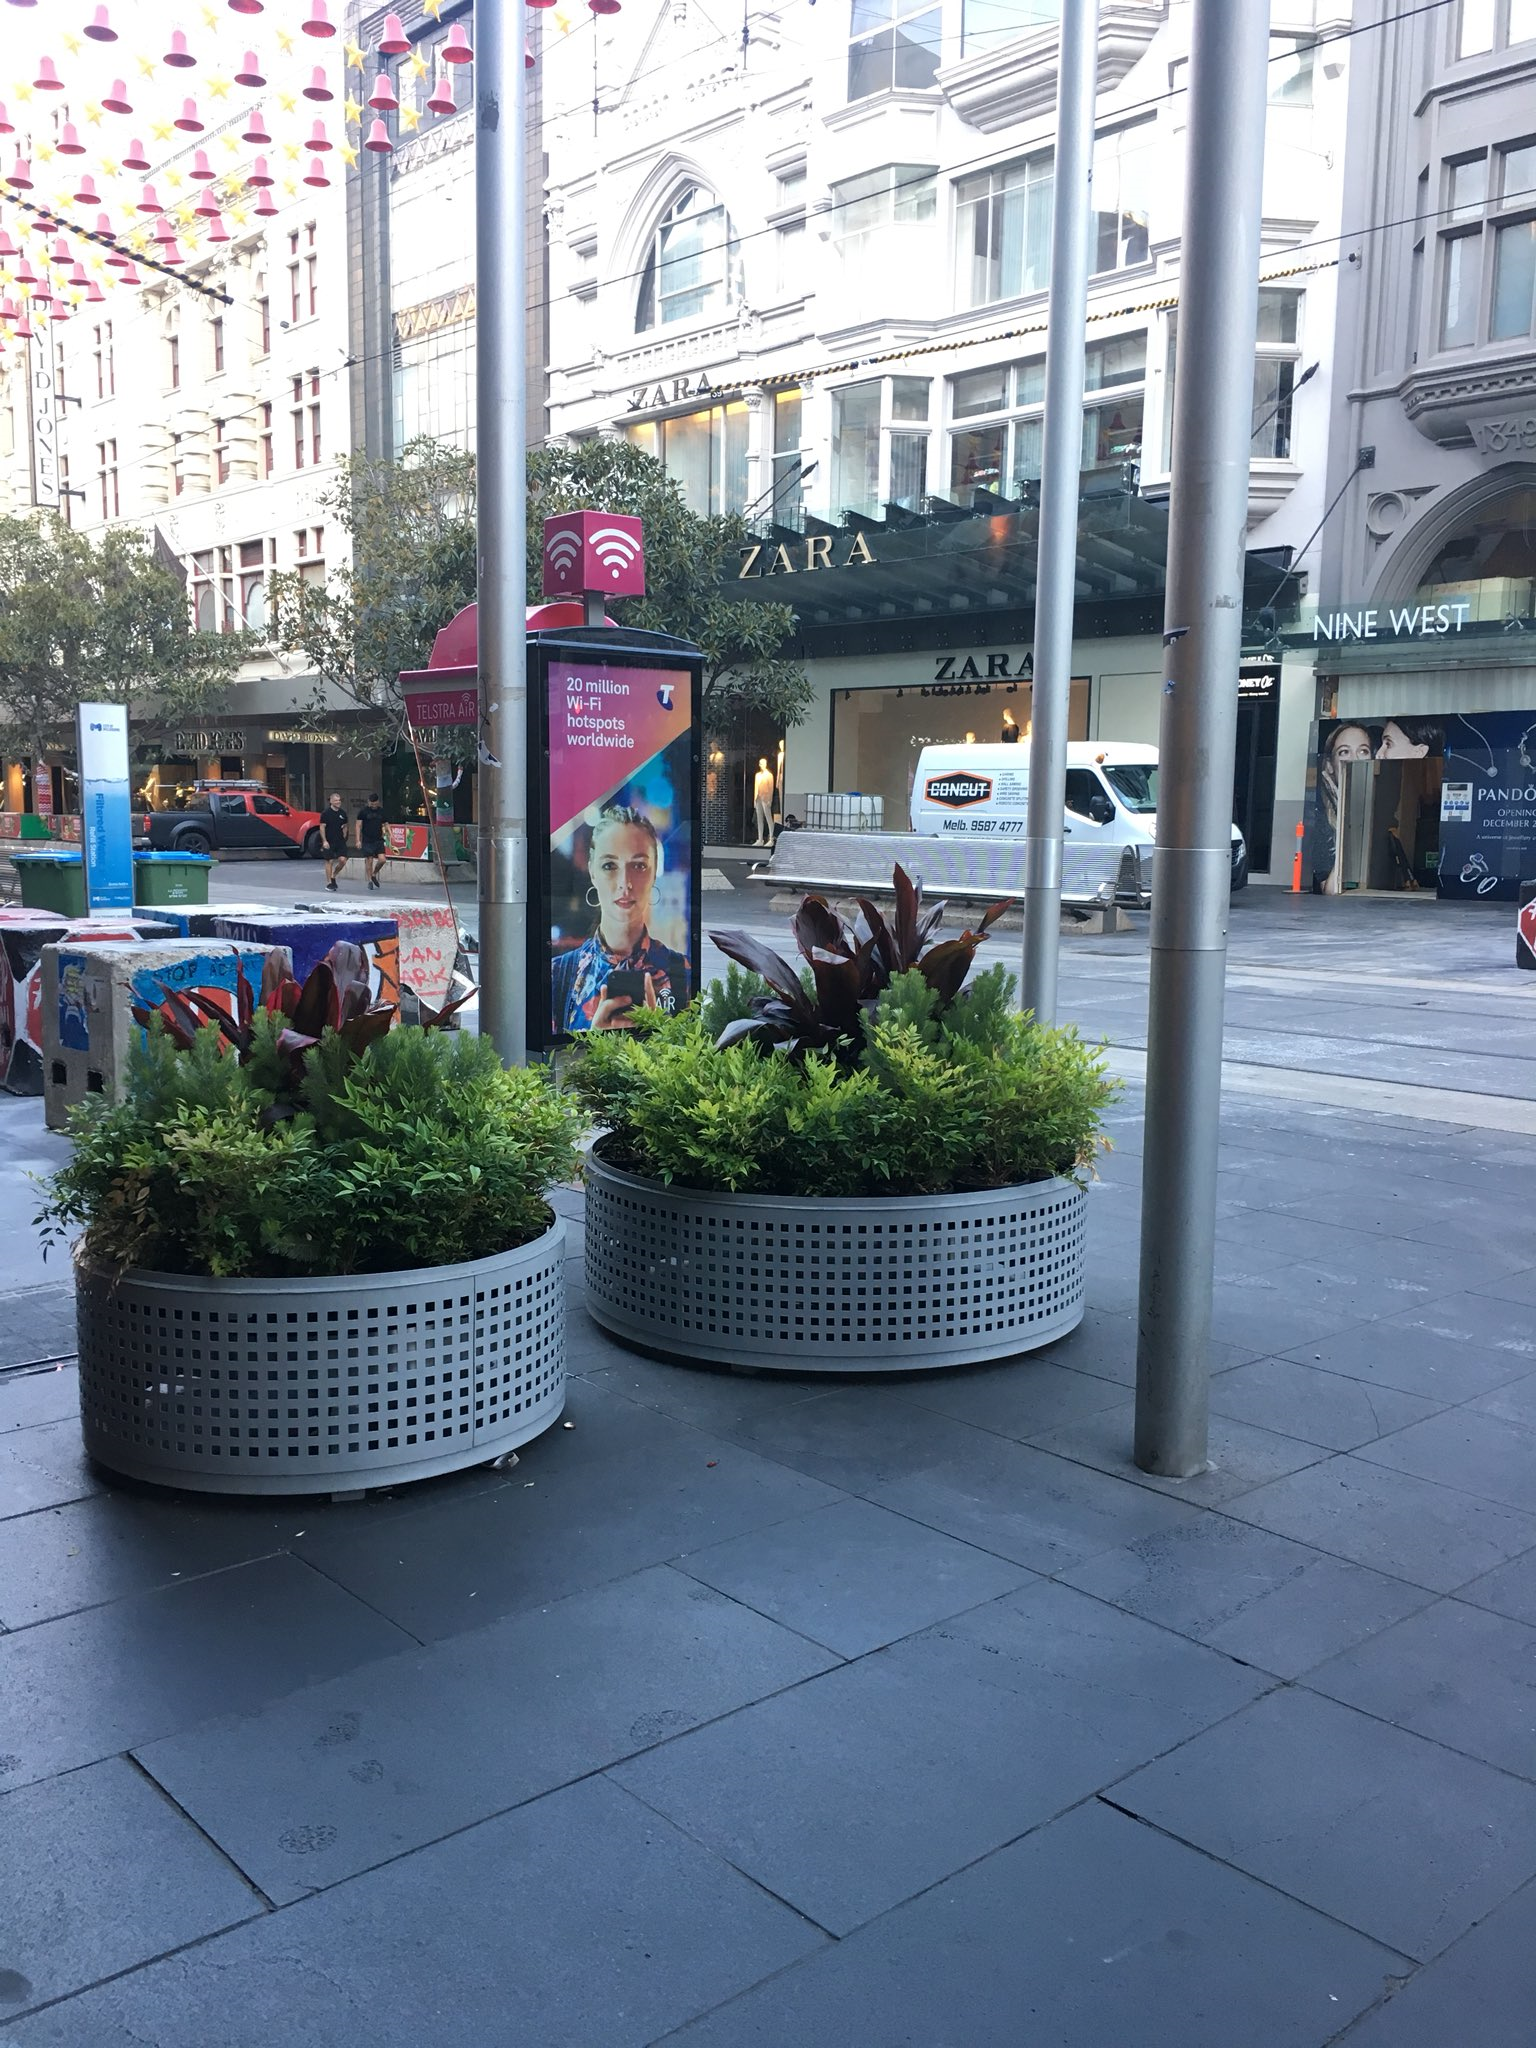 Ross and John cross to Bourke St where bollards are being replaced